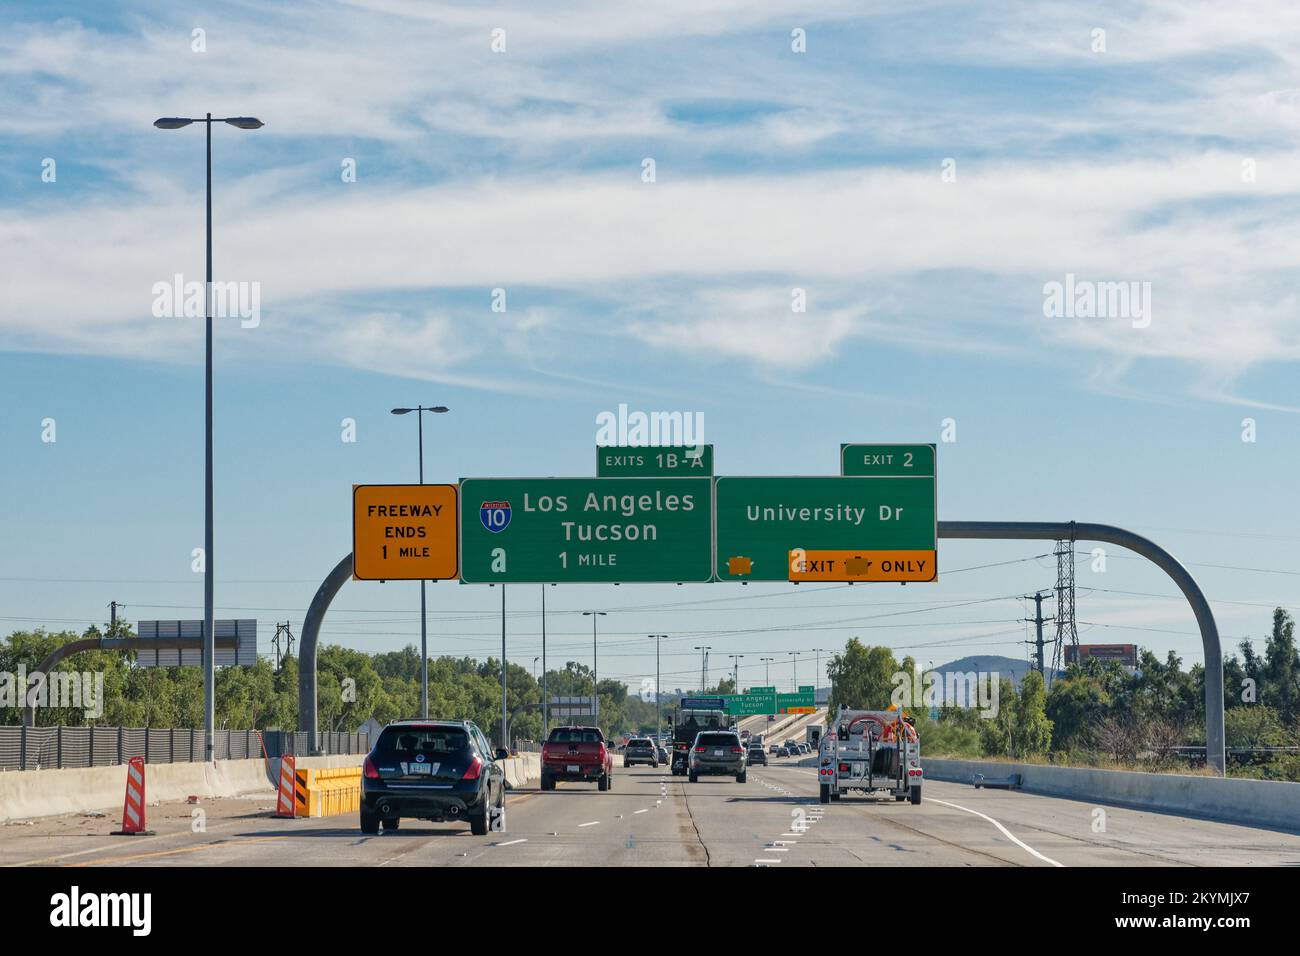 Phoenix, AZ - Nov. 14, 2022: Signs for Exit 2 for University Dr and Exit 1B-A for I10 toward Los Angeles and Tucson off of Arizona State Route 143, al Stock Photo